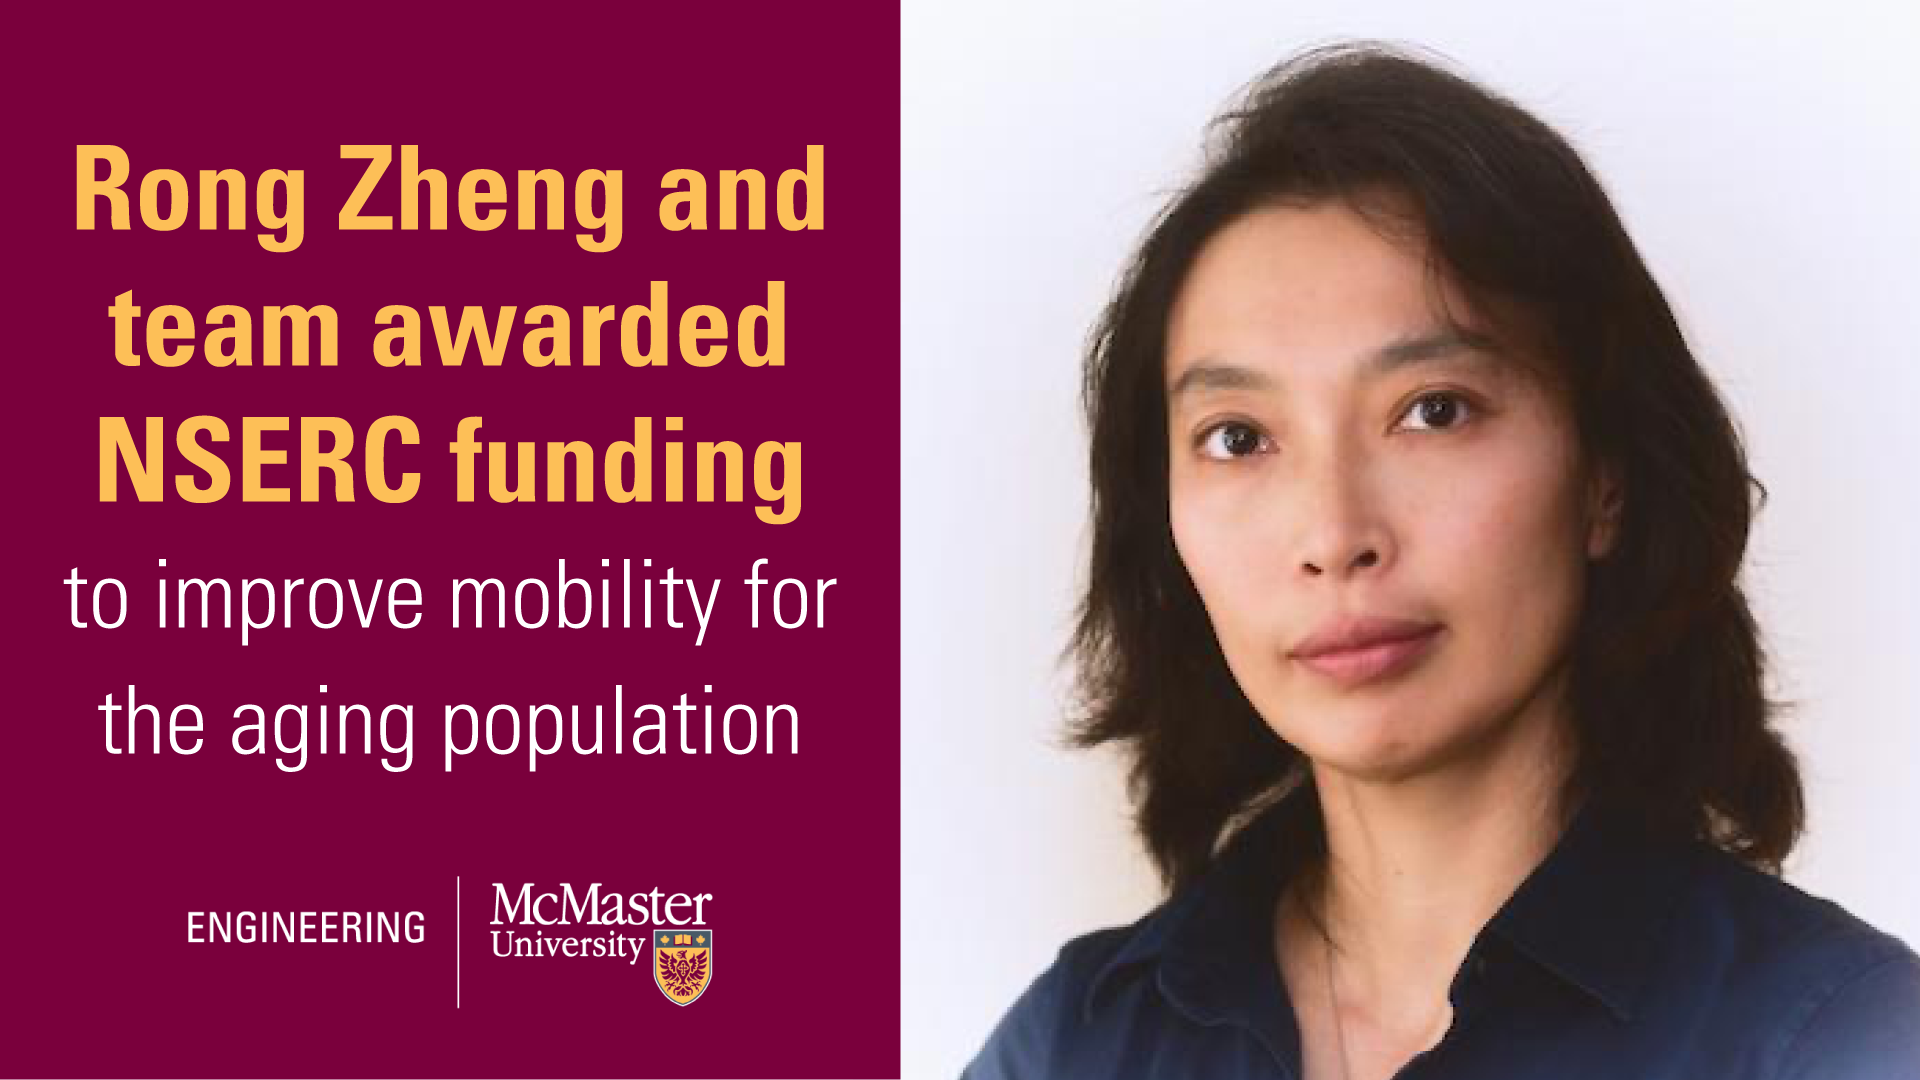 Rong Zheng and team awarded NSERC funding to improve mobility for the aging population